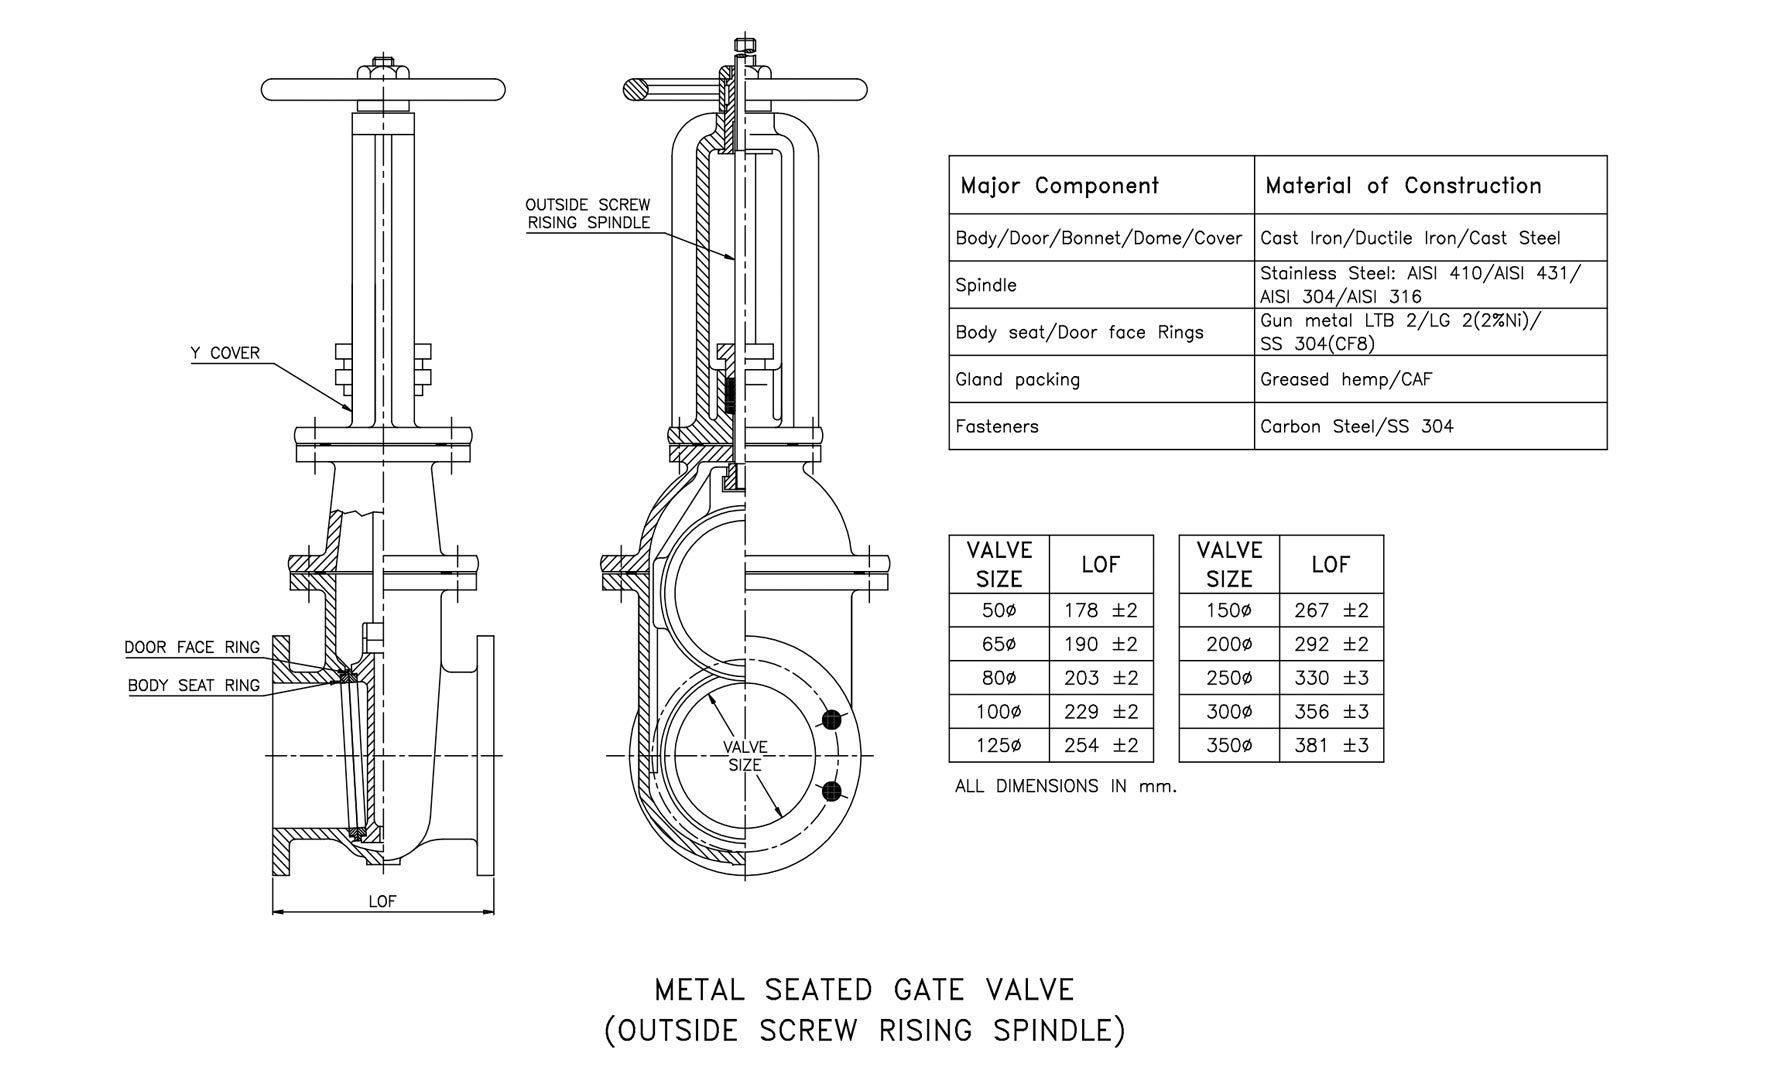 OUTSIDE SCREW RISING SPINDLE GATE VALVE